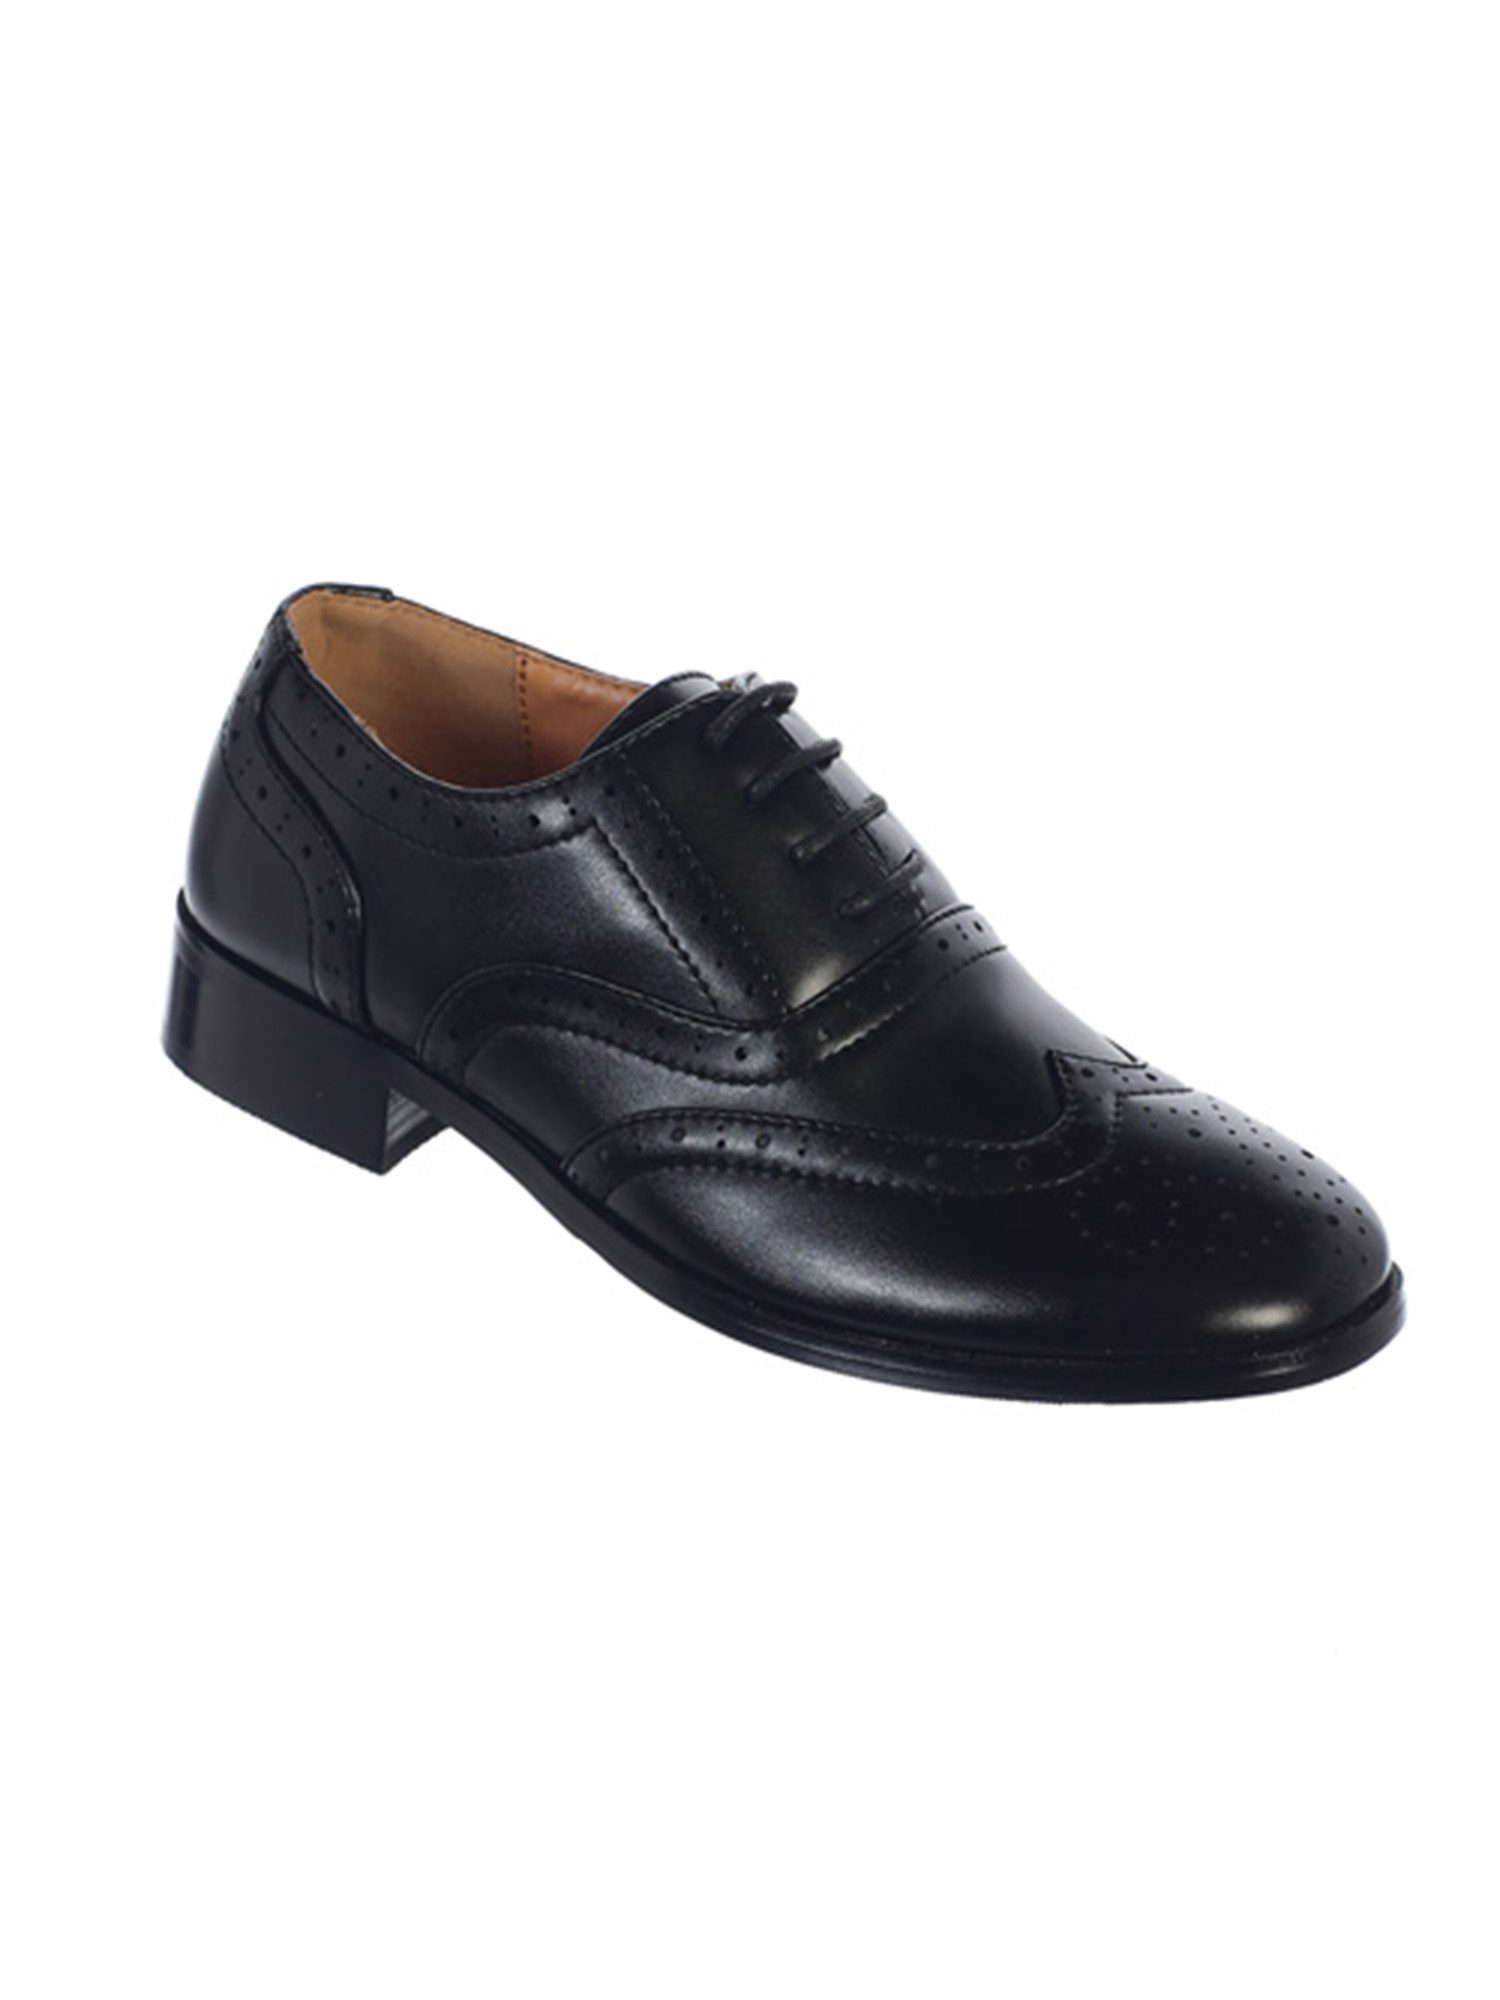 Avery Hill Boys Lace-Up Formal Oxford Style Special Occasion Dress Shoes - Black LittleKid 2